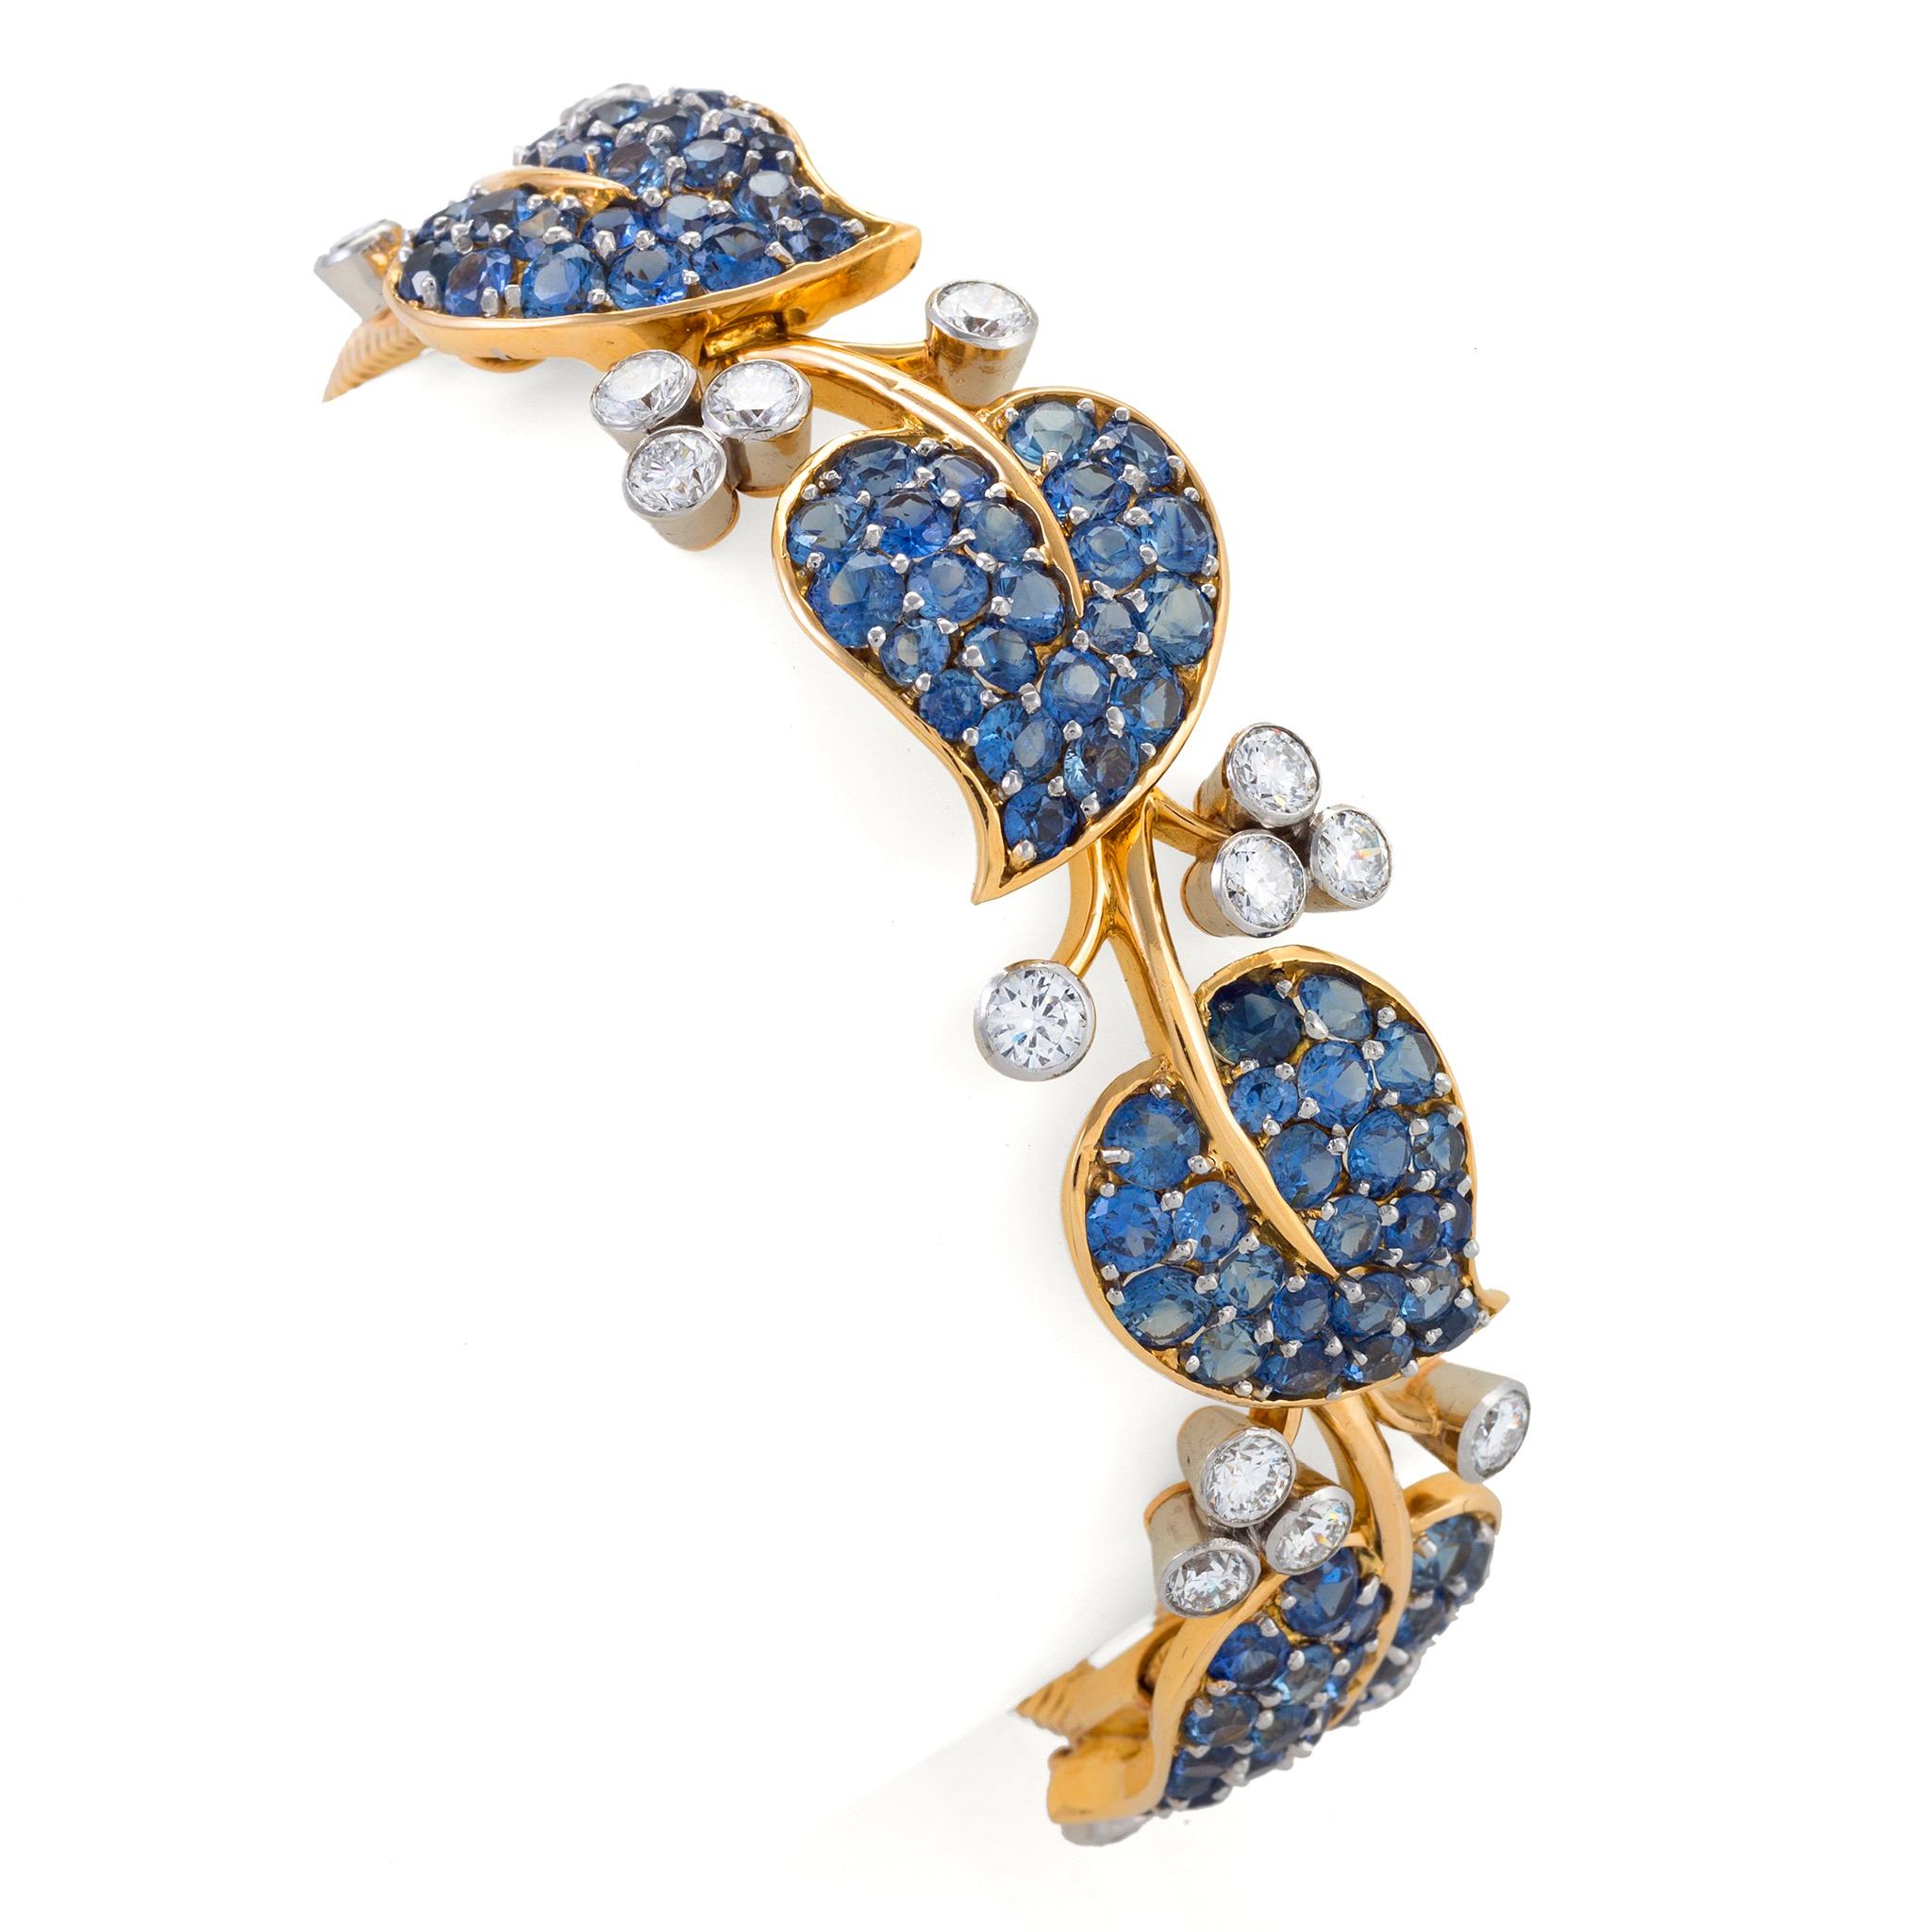 Set with Montana sapphires and diamonds, and mounted in 18K gold, this Van Cleef & Arpels New York bracelet dates from 1955. Designed a curving vine of pavé-set sapphire leaves joined by gold tendrils, and highlighted by clustered diamond buds and